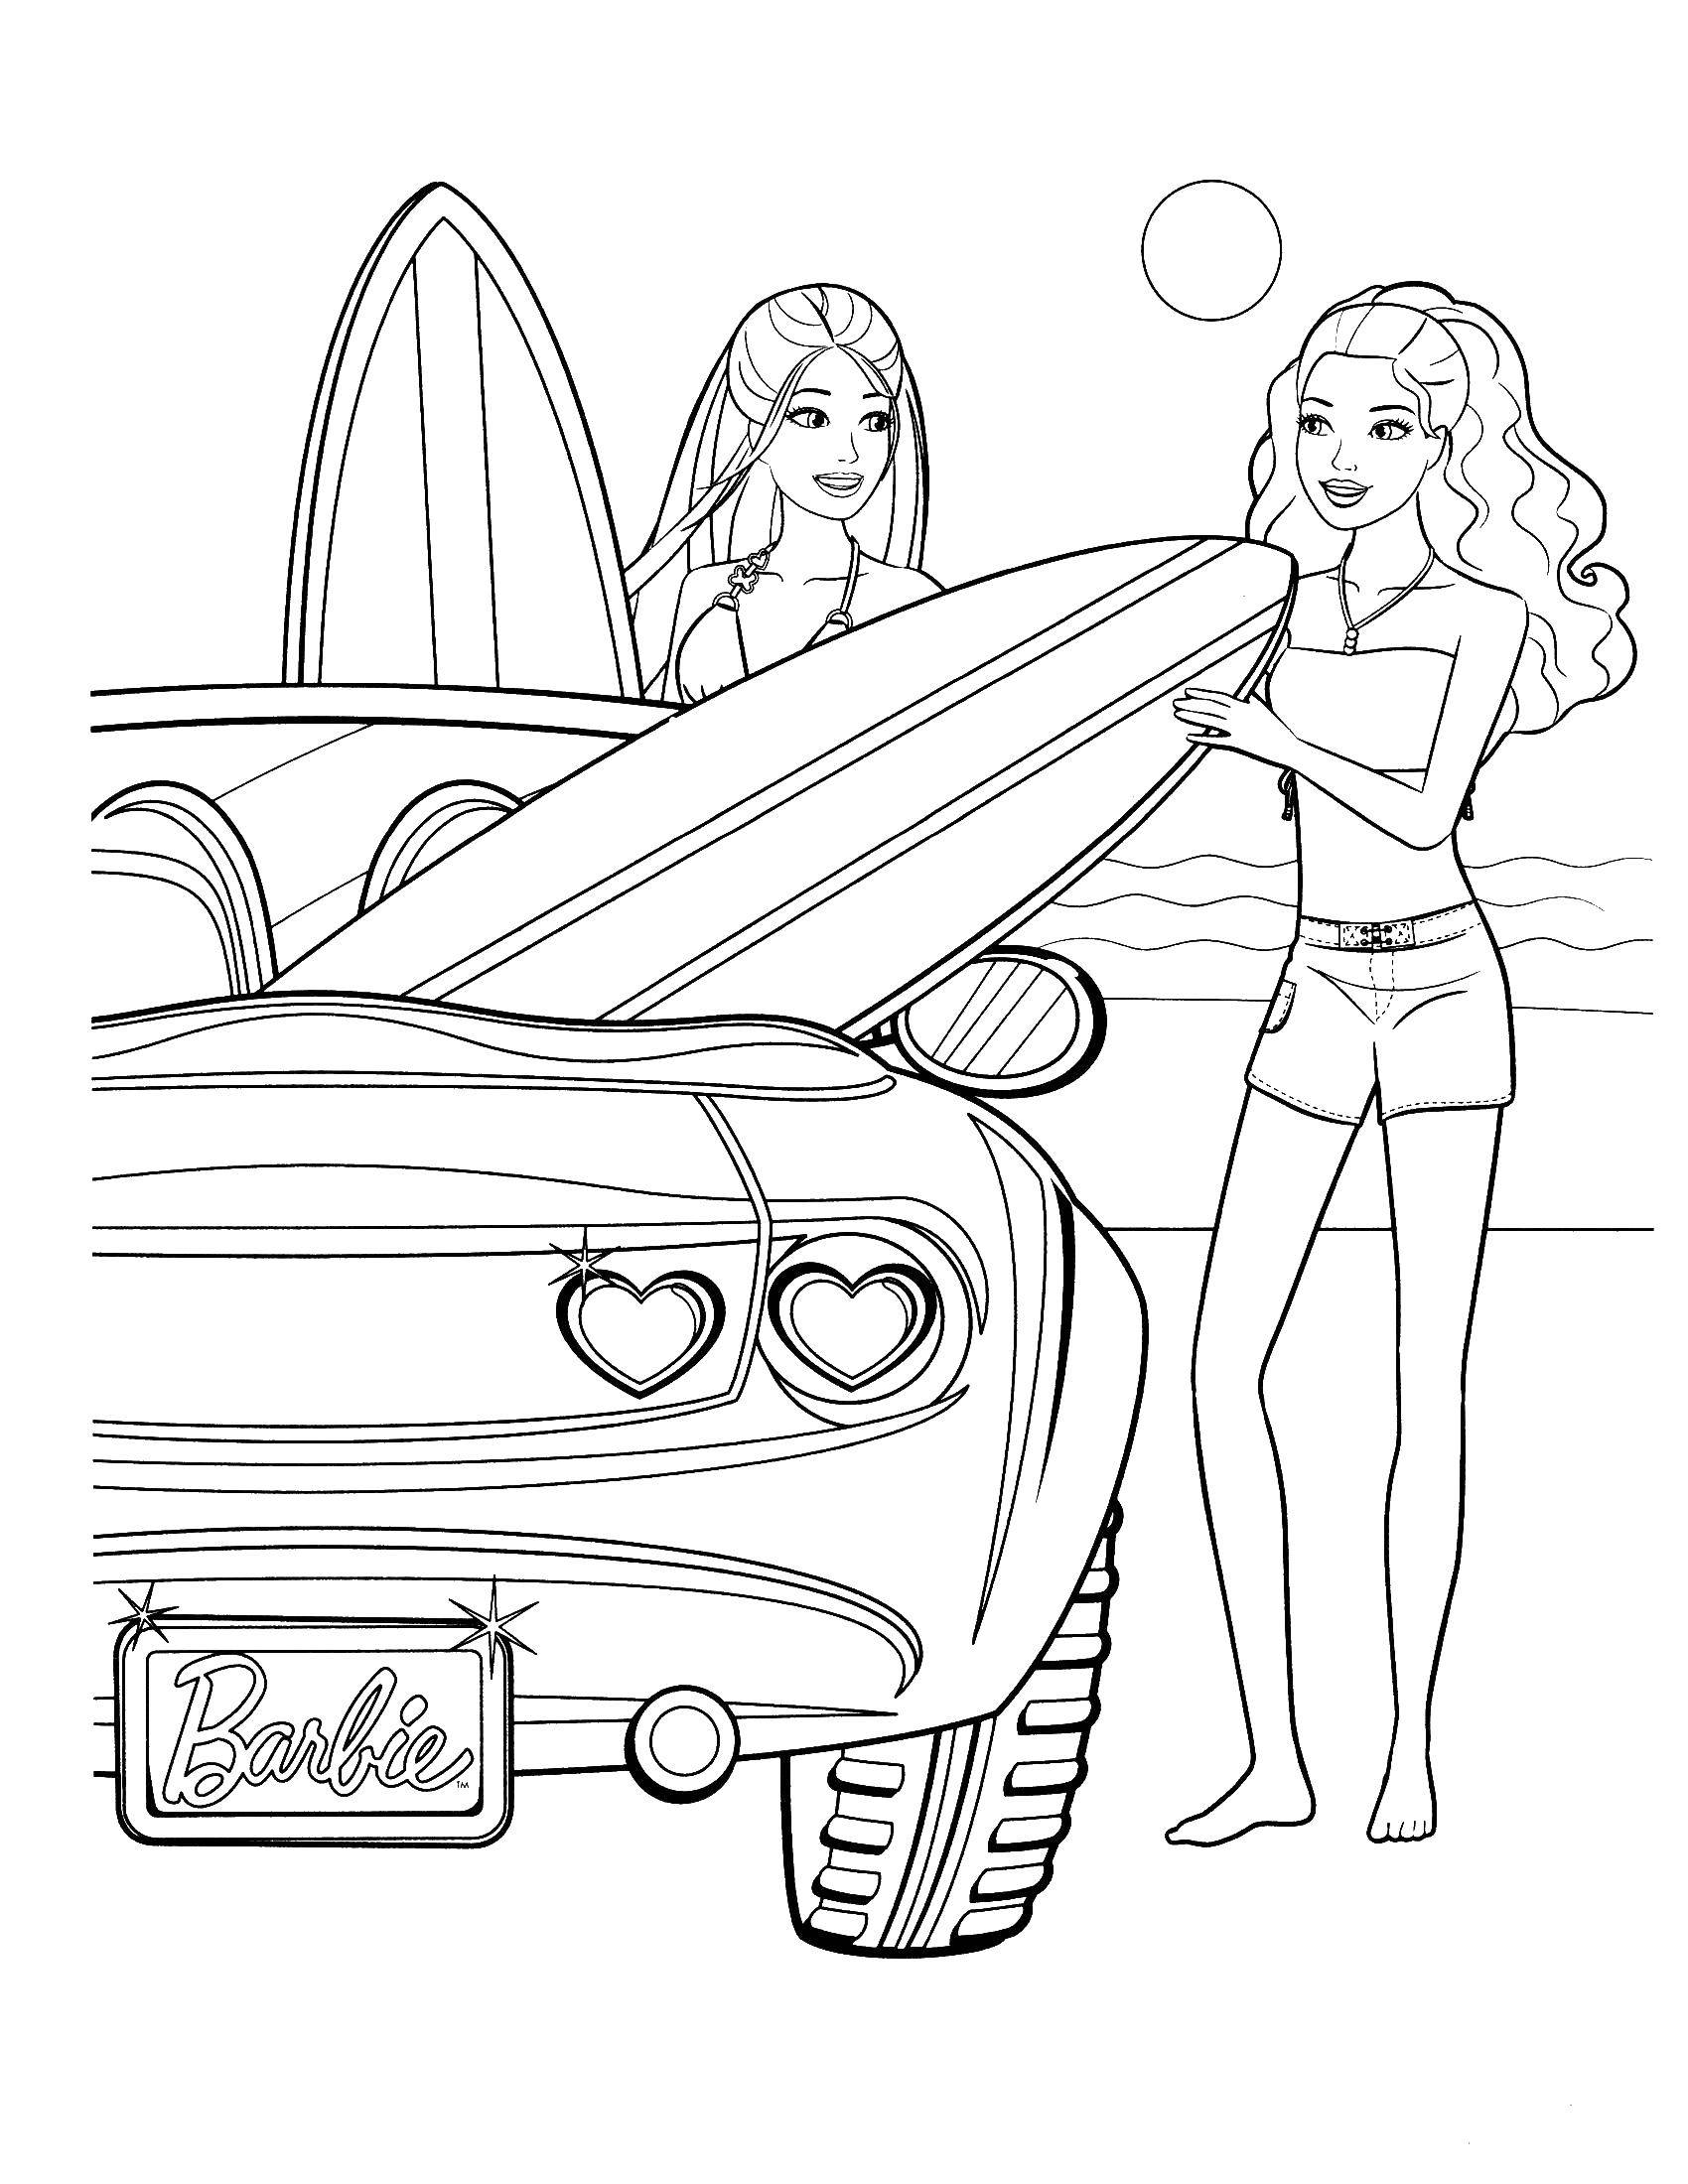 Coloring Barbie in a swimsuit on the beach. Category Barbie . Tags:  Barbie , swimsuit, beach.